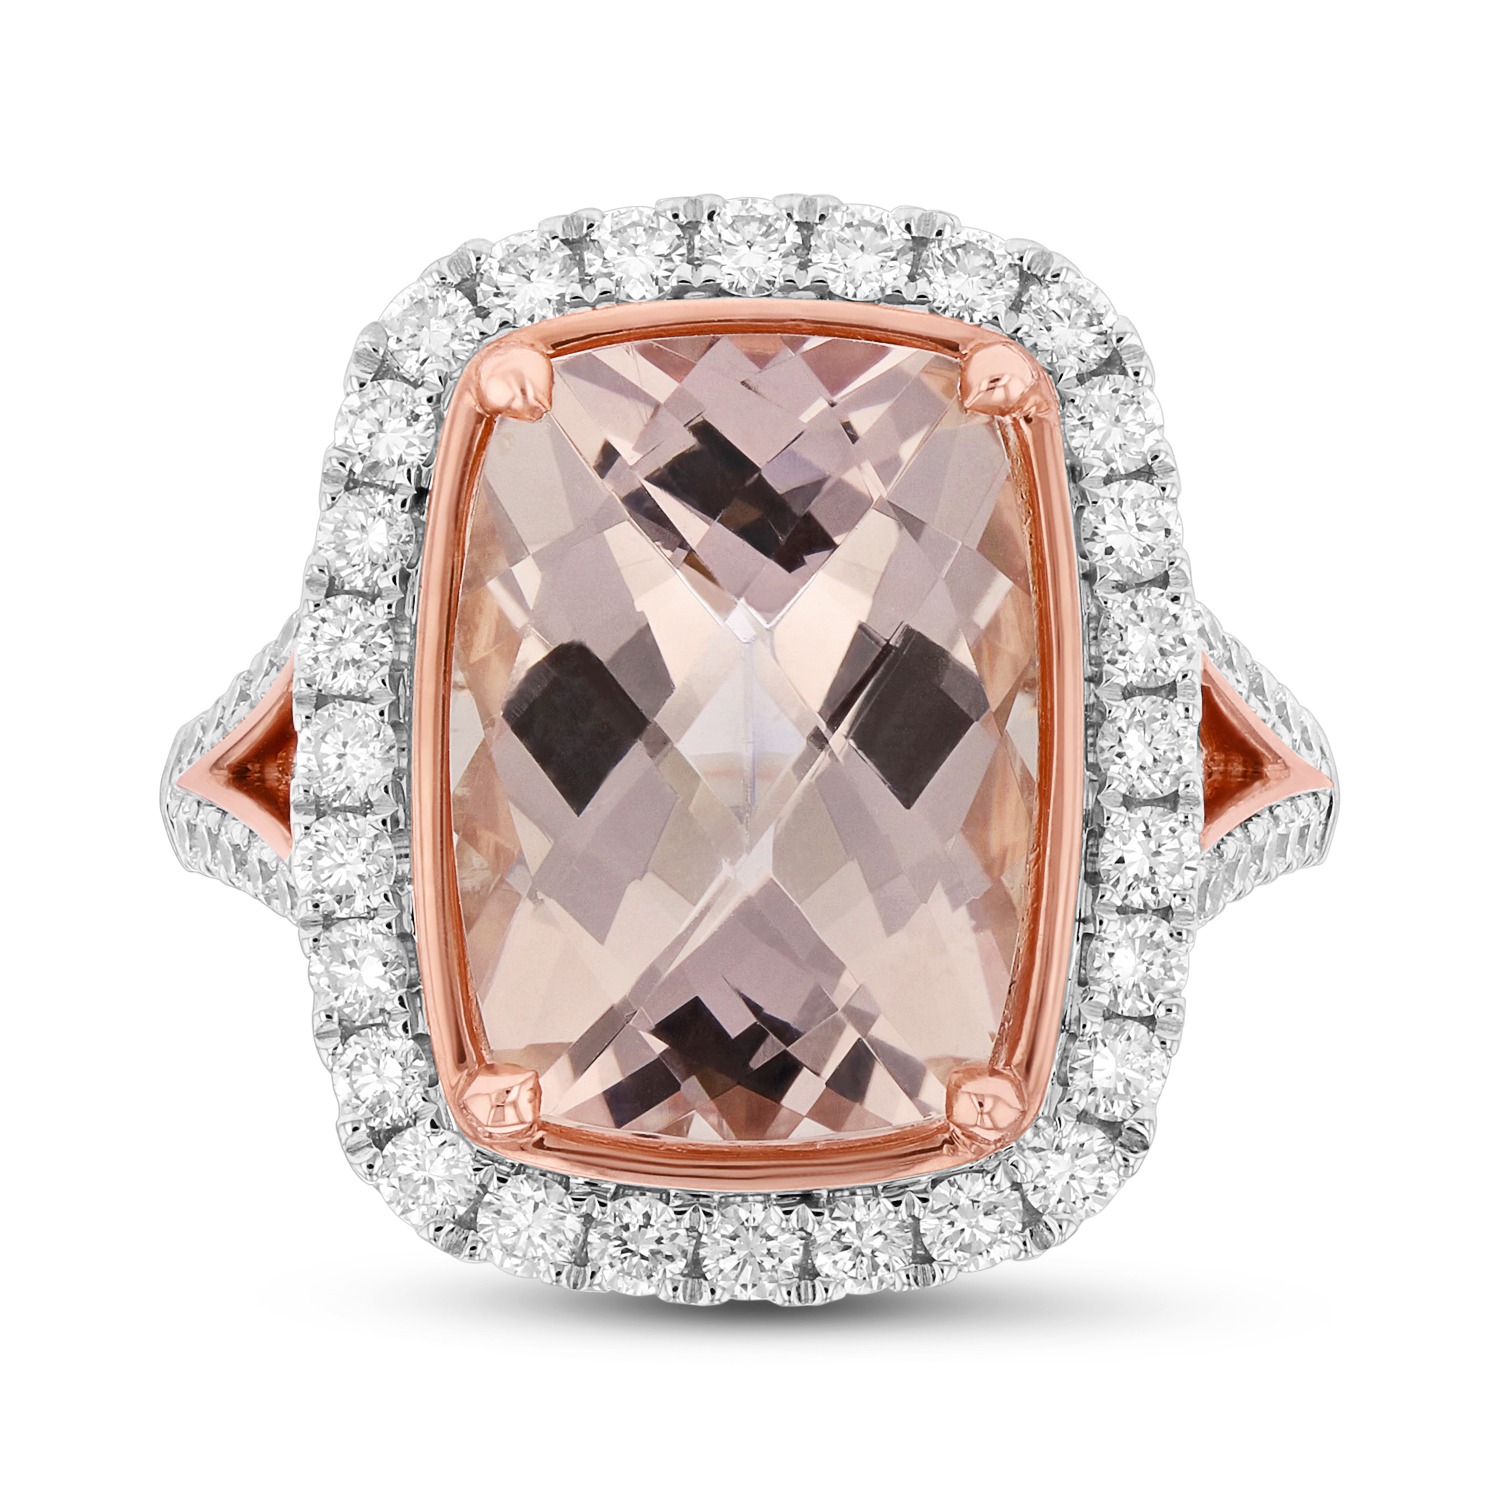 View Diamond and 14X10mm Cushion Cut Morganite Ring in 14k Two Tone Gold